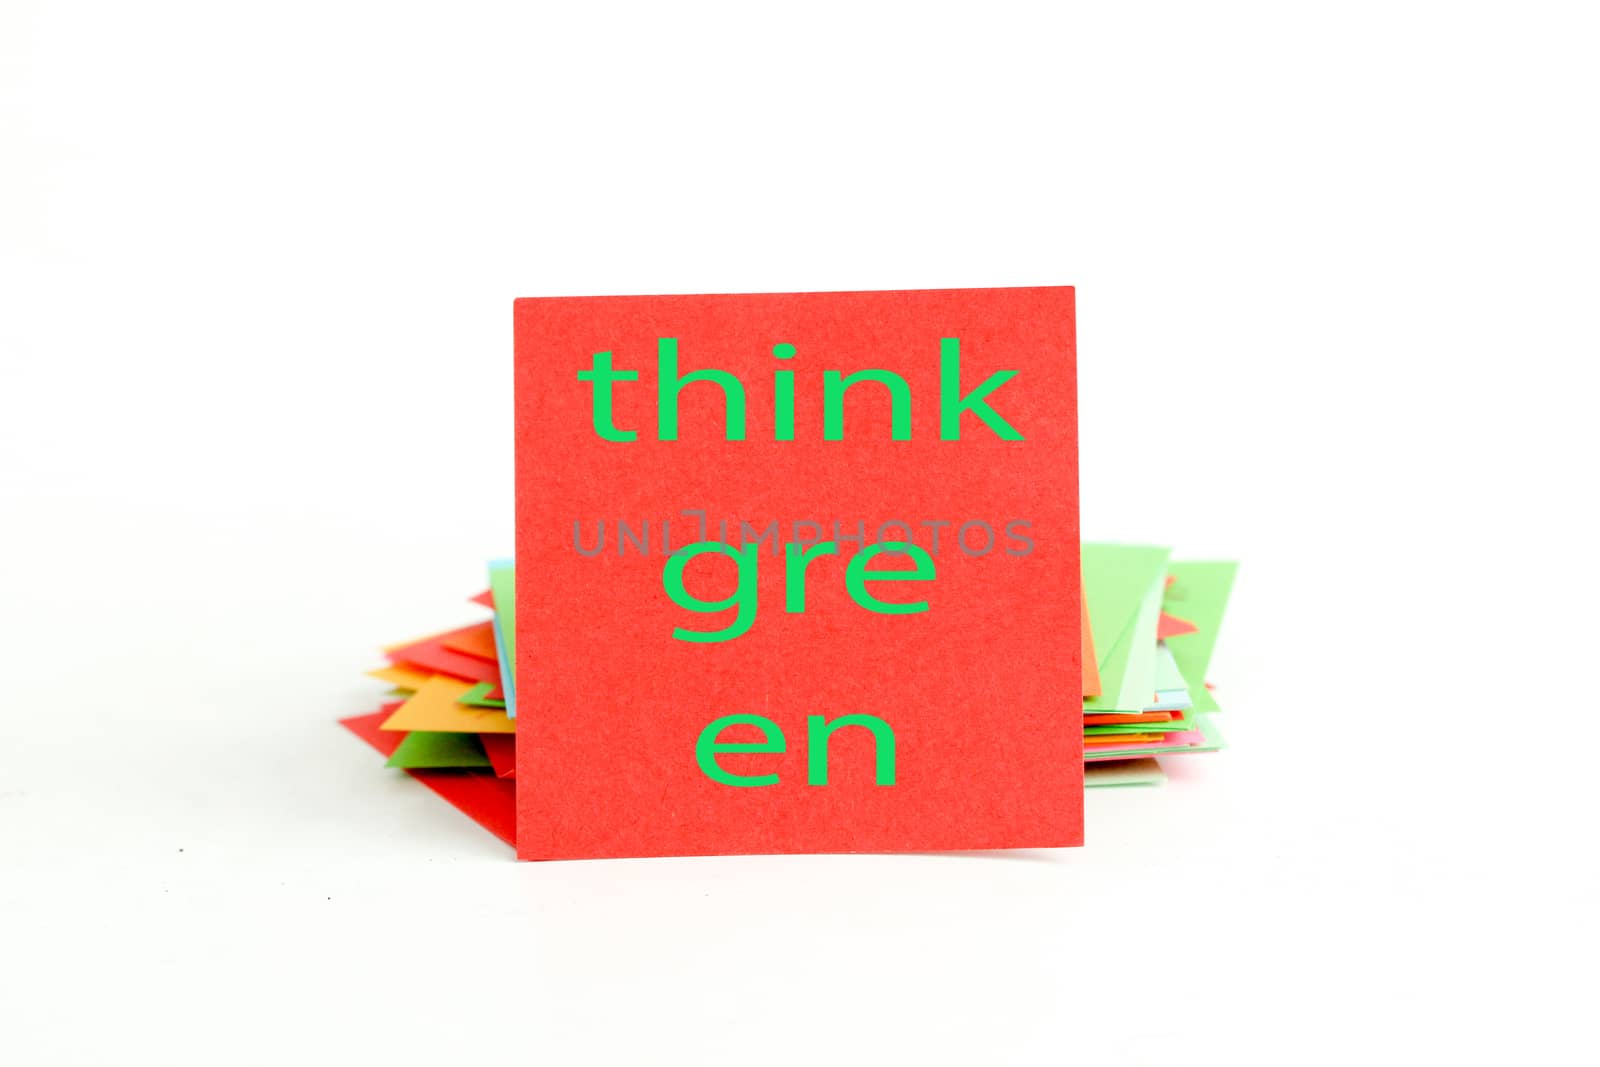 picture of a red note paper with text think green